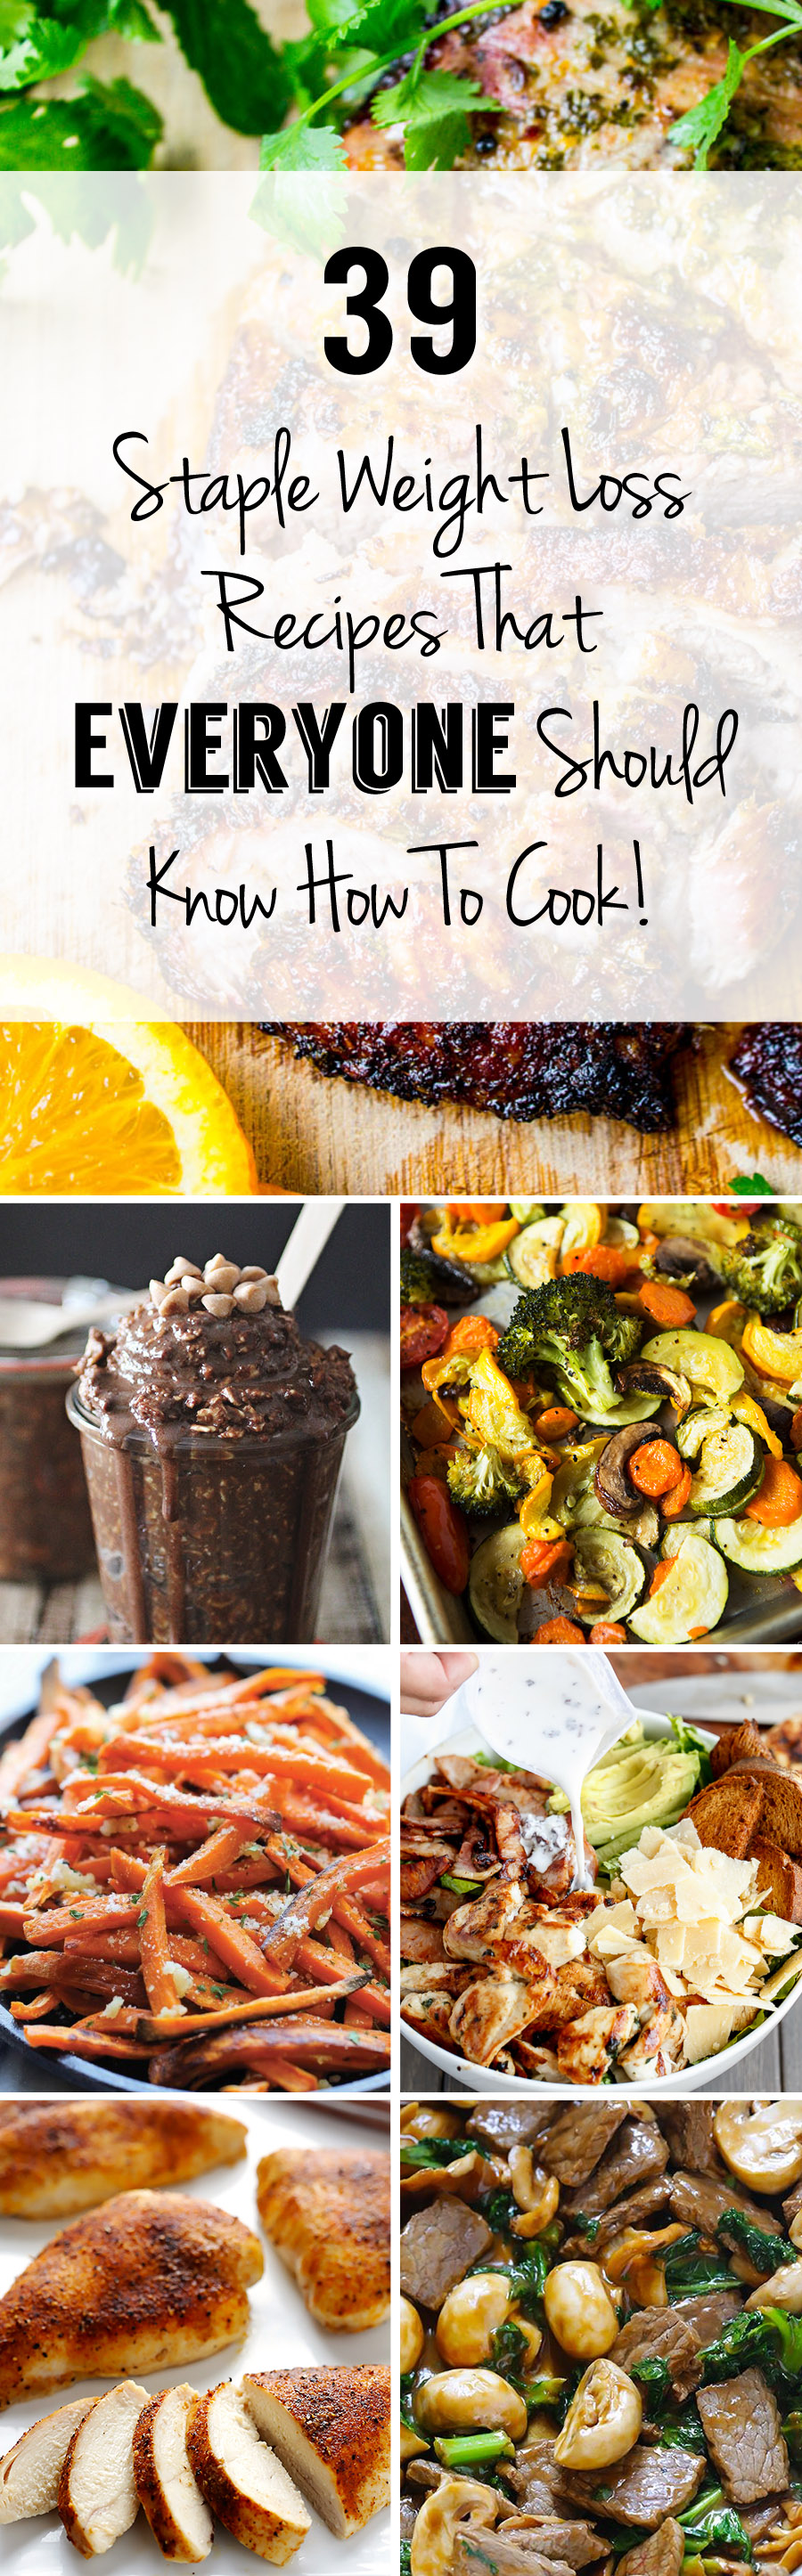 39 Staple Weight Loss Recipes That Everybody Should Know How To Cook!